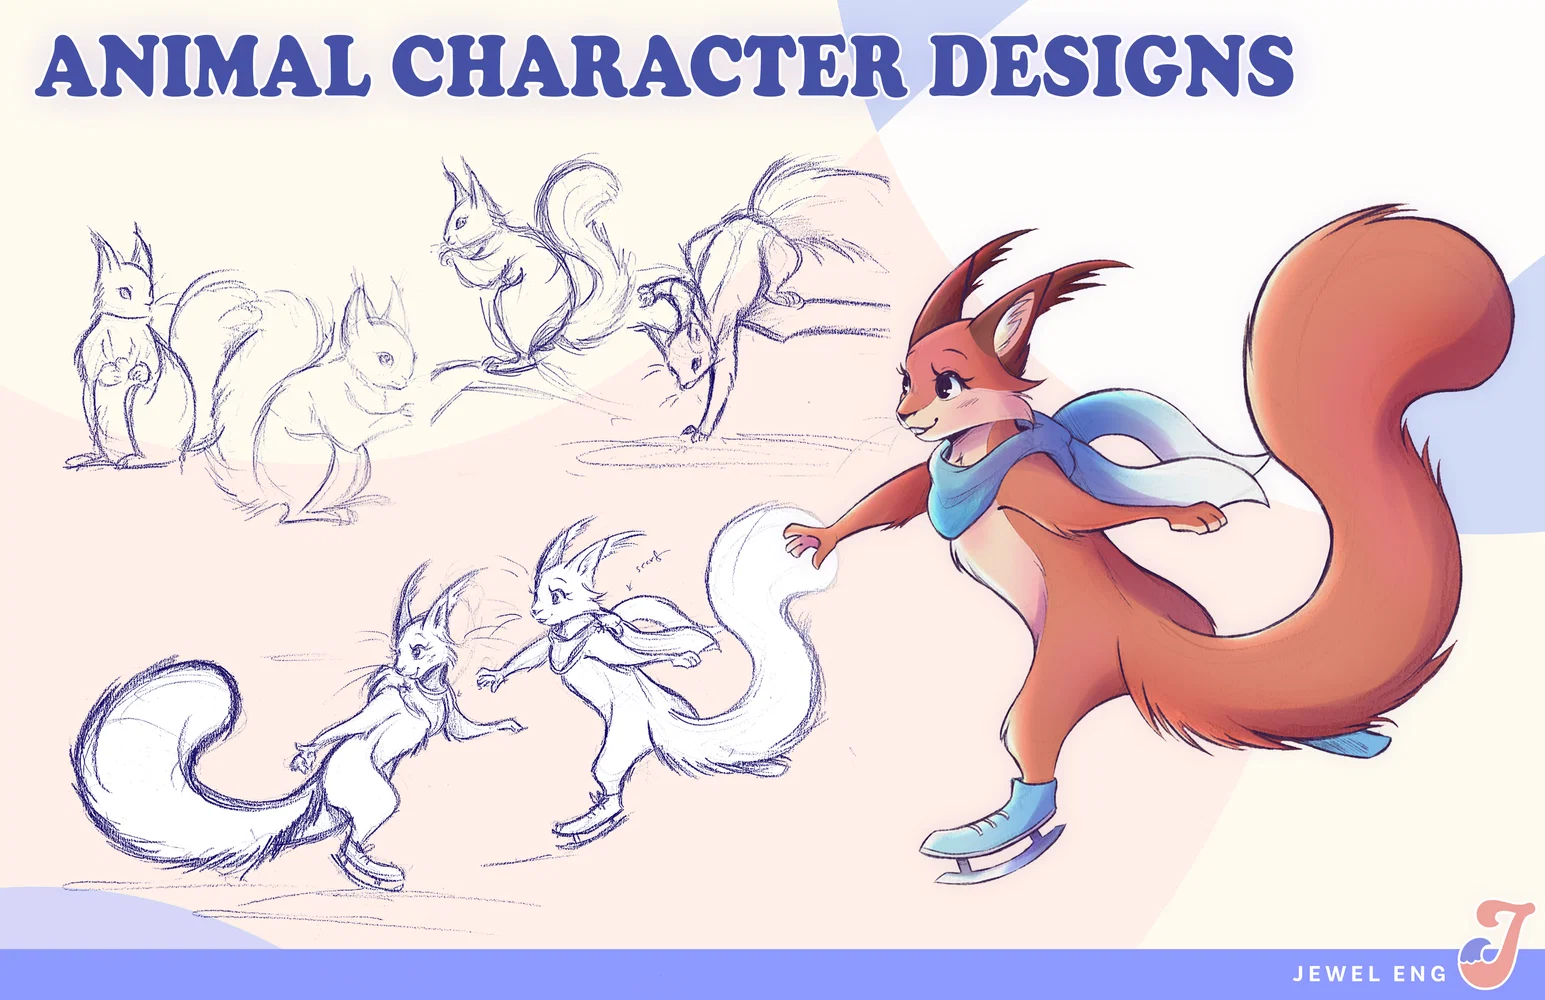 A portfolio page showing various animal studies and sketches with a final rendered drawing of a red squirrel character ice skating.